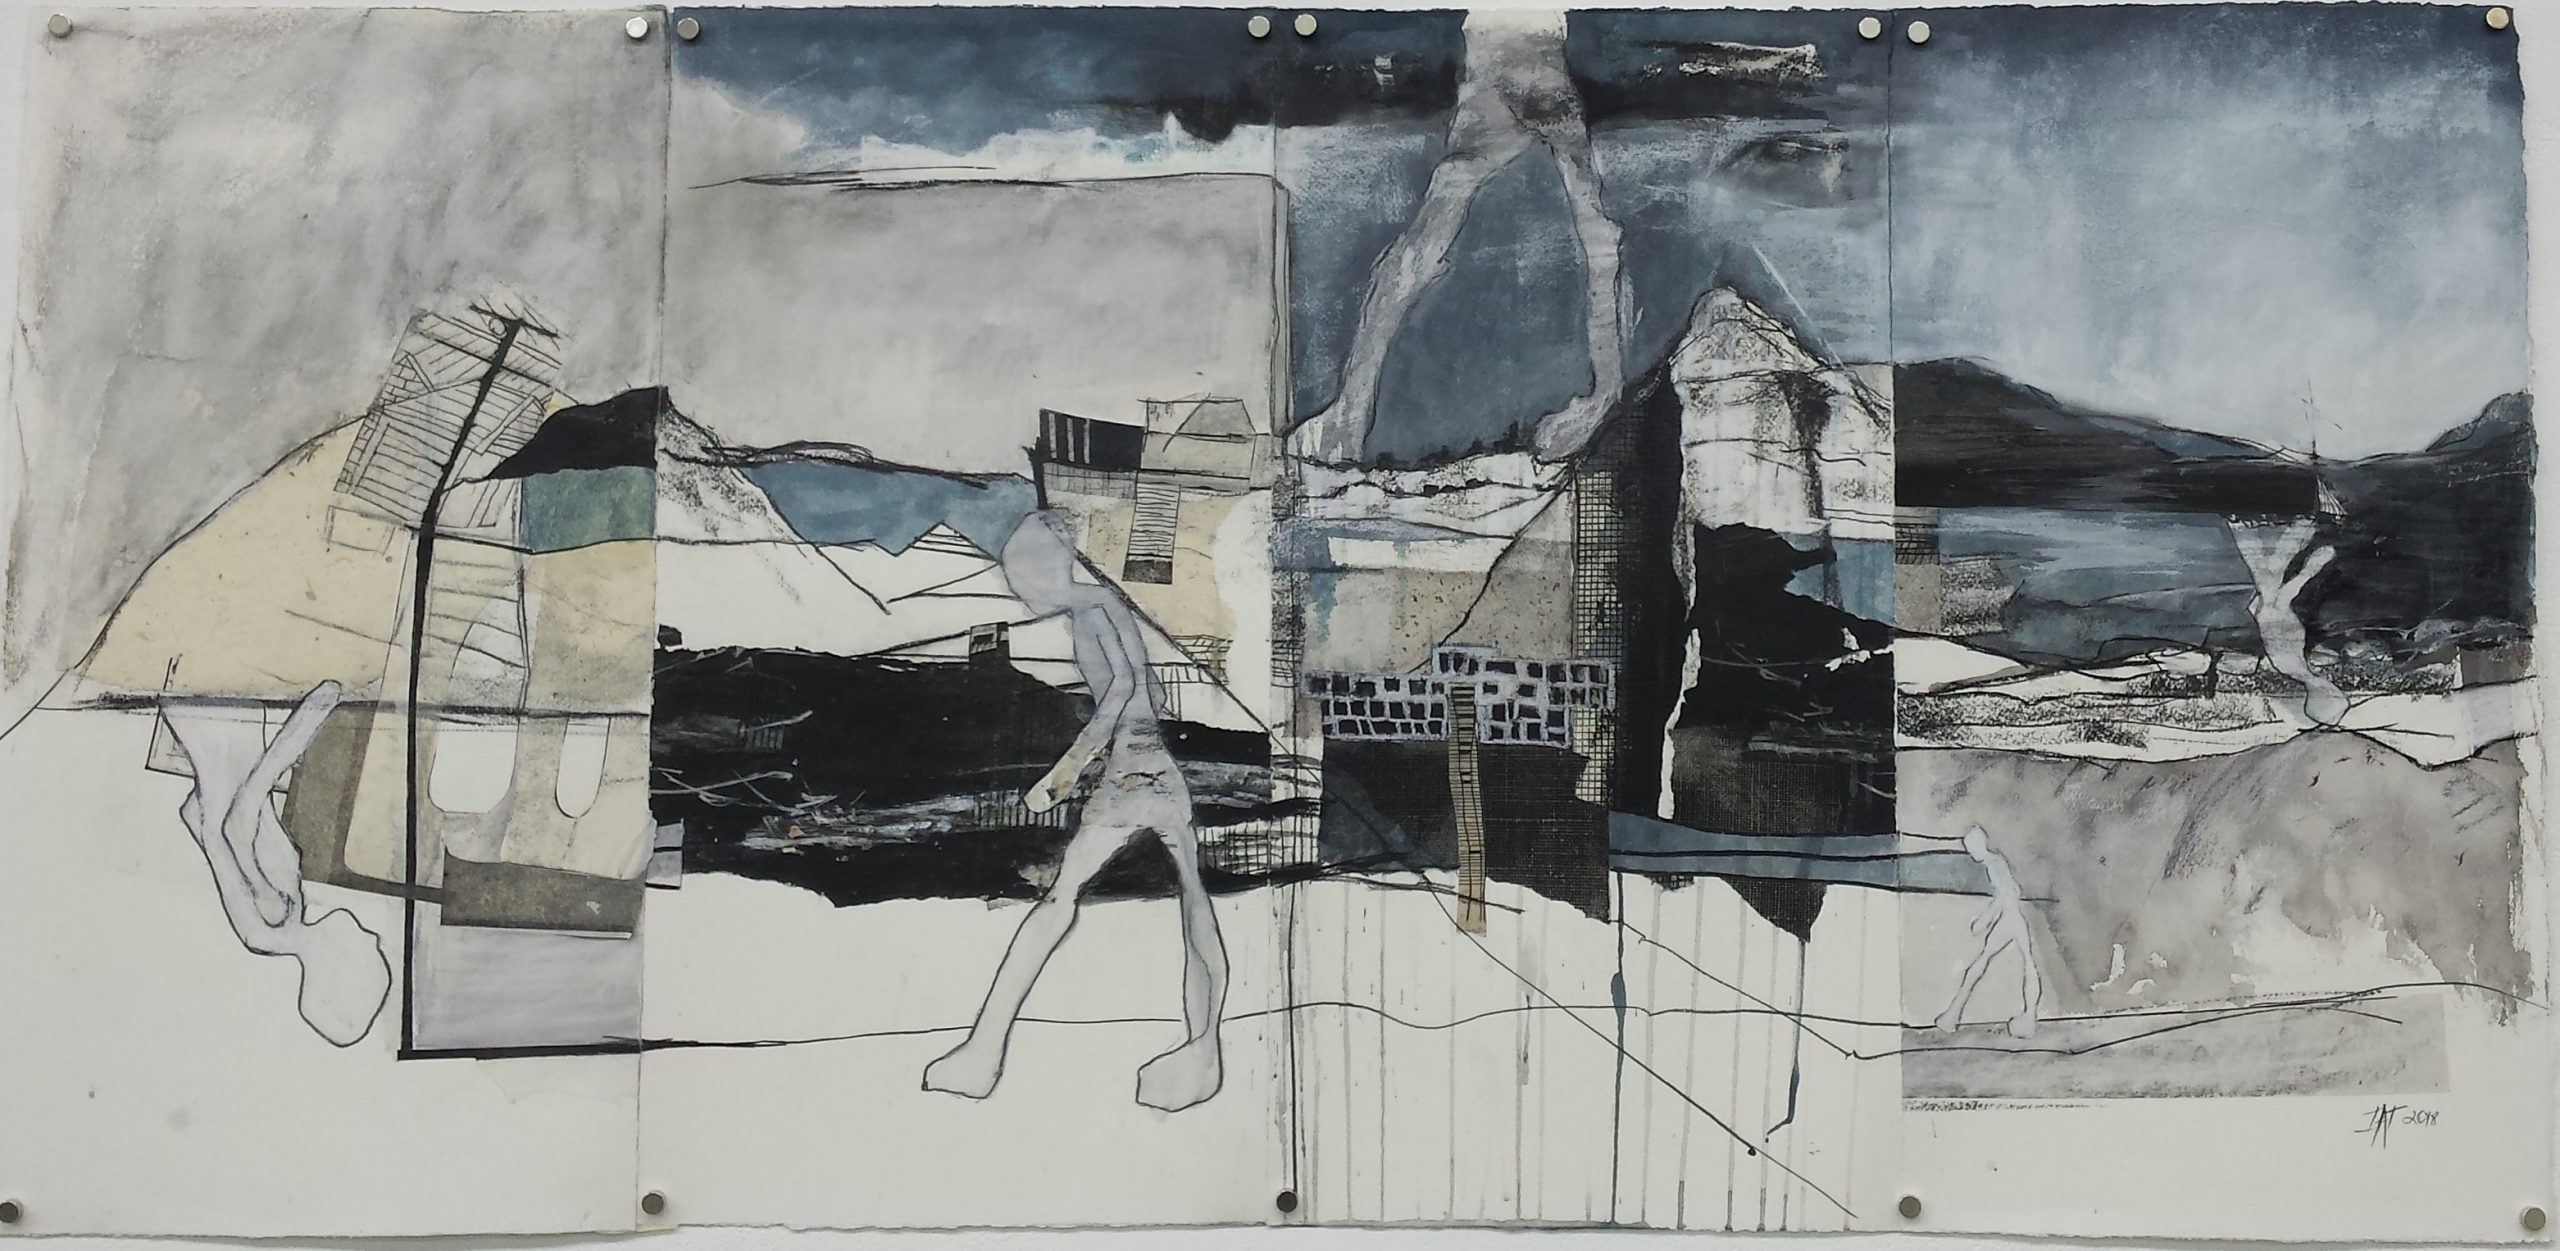 Thornton_Julie_With heavy feet and lofty hope_75x132cm_charcol,ink,collage_001